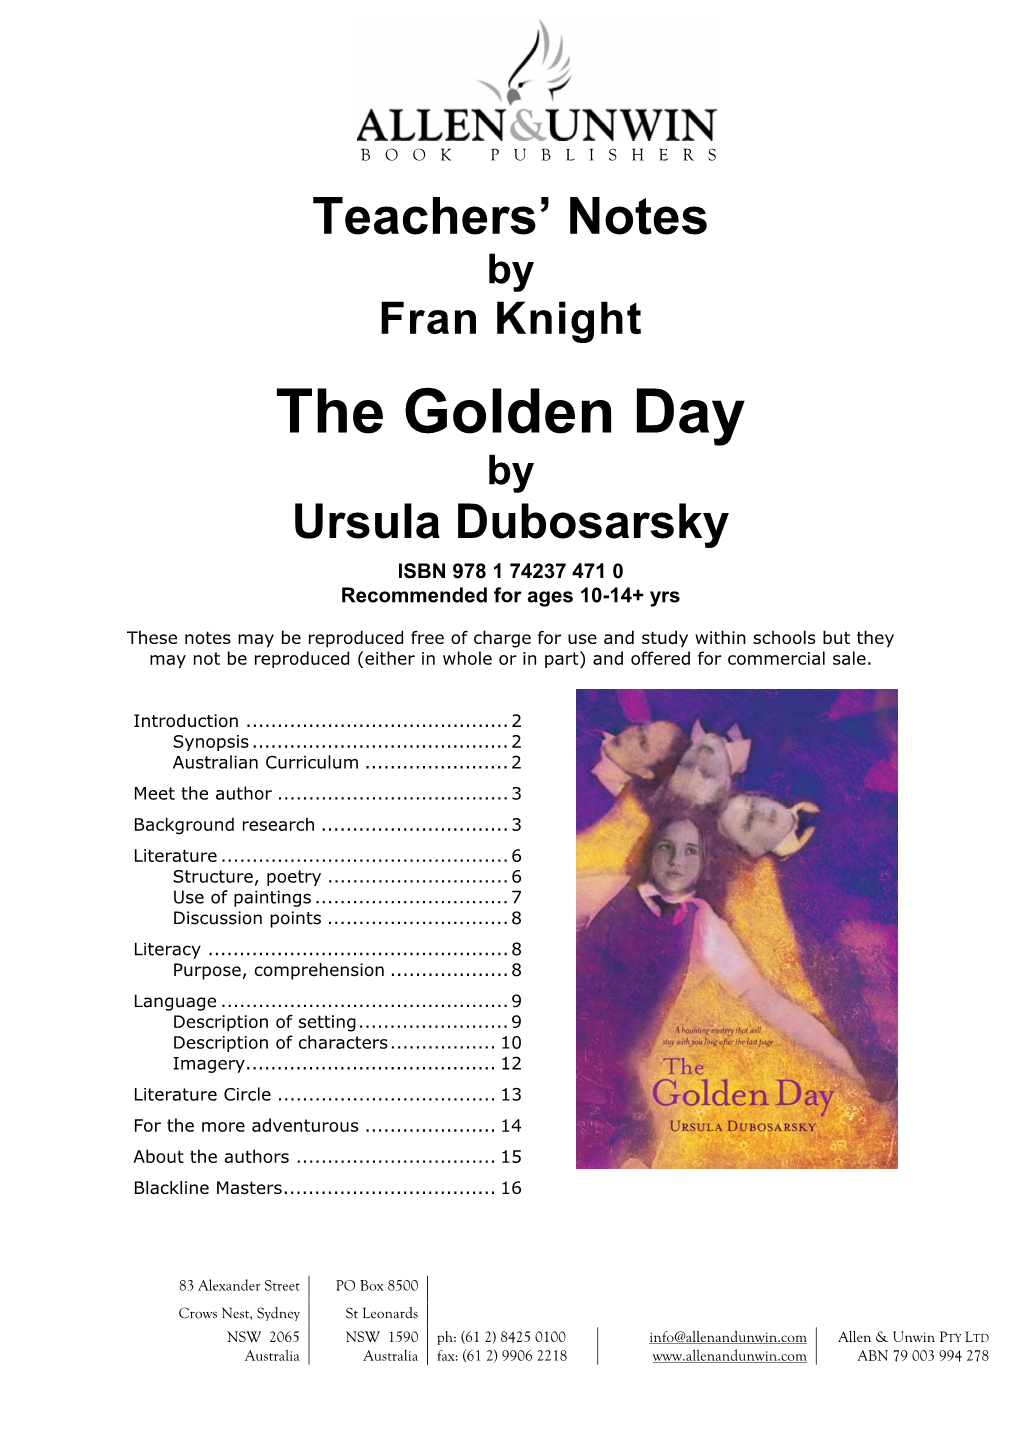 The Golden Day by Ursula Dubosarsky ISBN 978 1 74237 471 0 Recommended for Ages 10-14+ Yrs